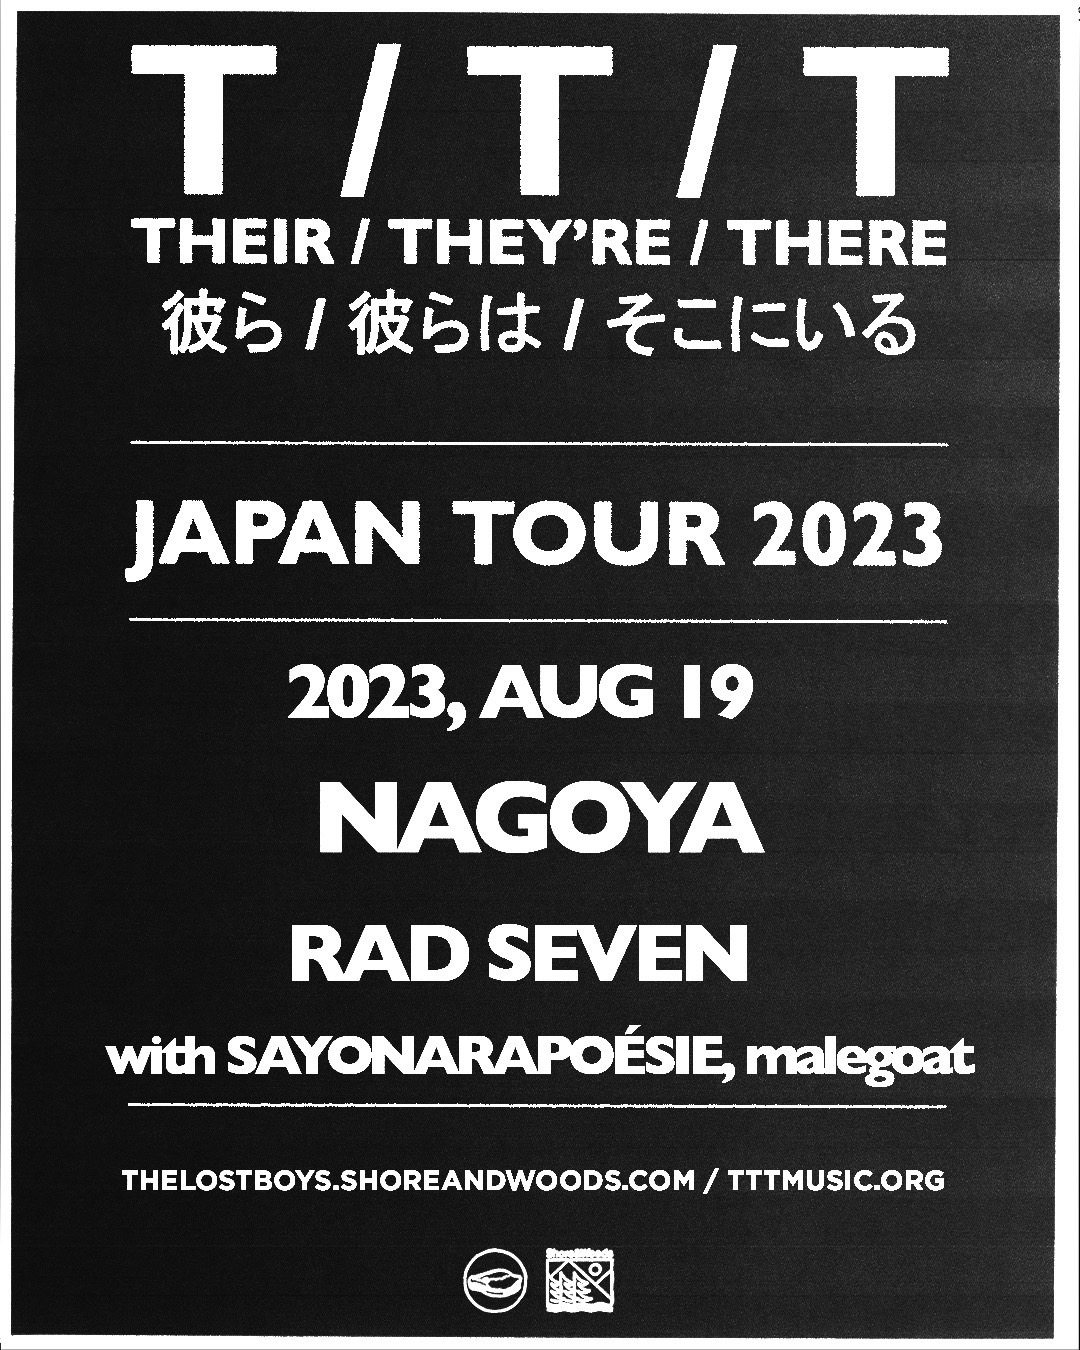 The Lost Boys Present Their / They’re / There Japan Tour 2023